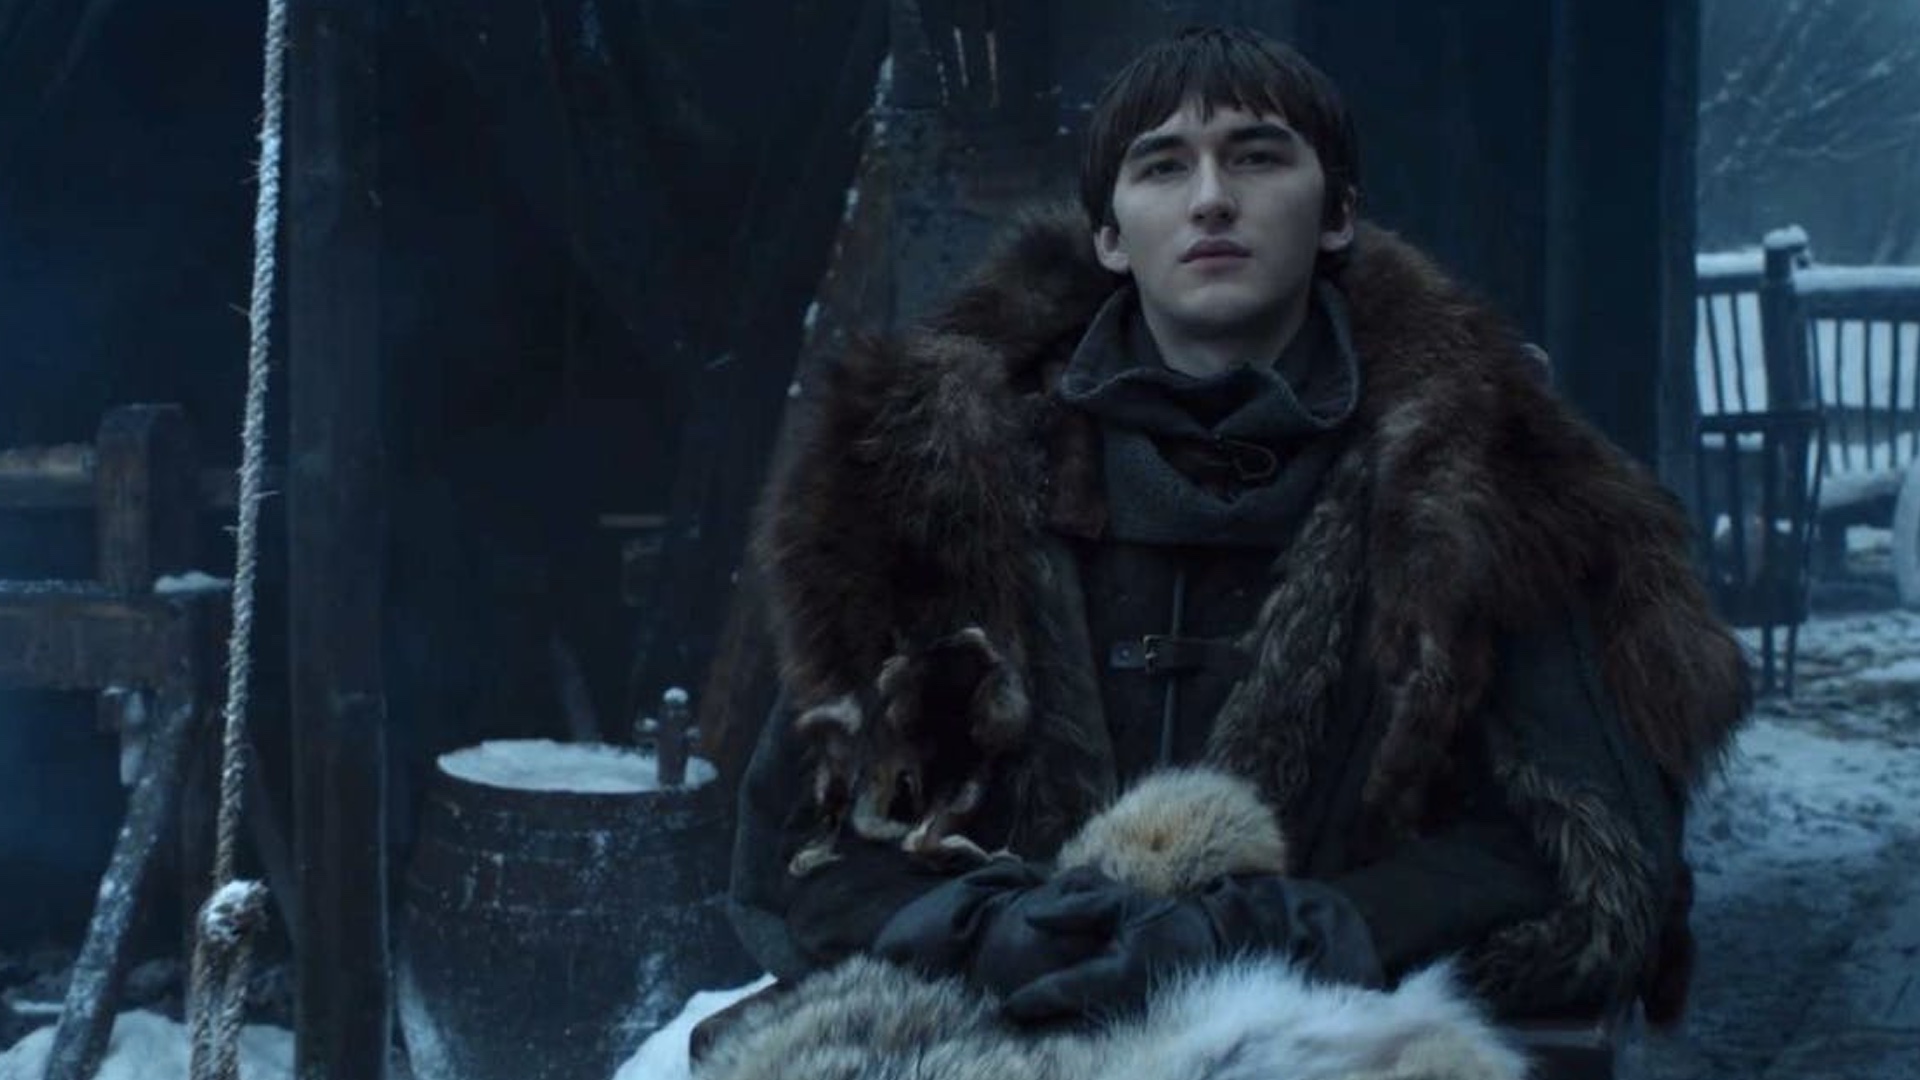 Bran S Ending In Game Of Thrones Came From George R R Martin